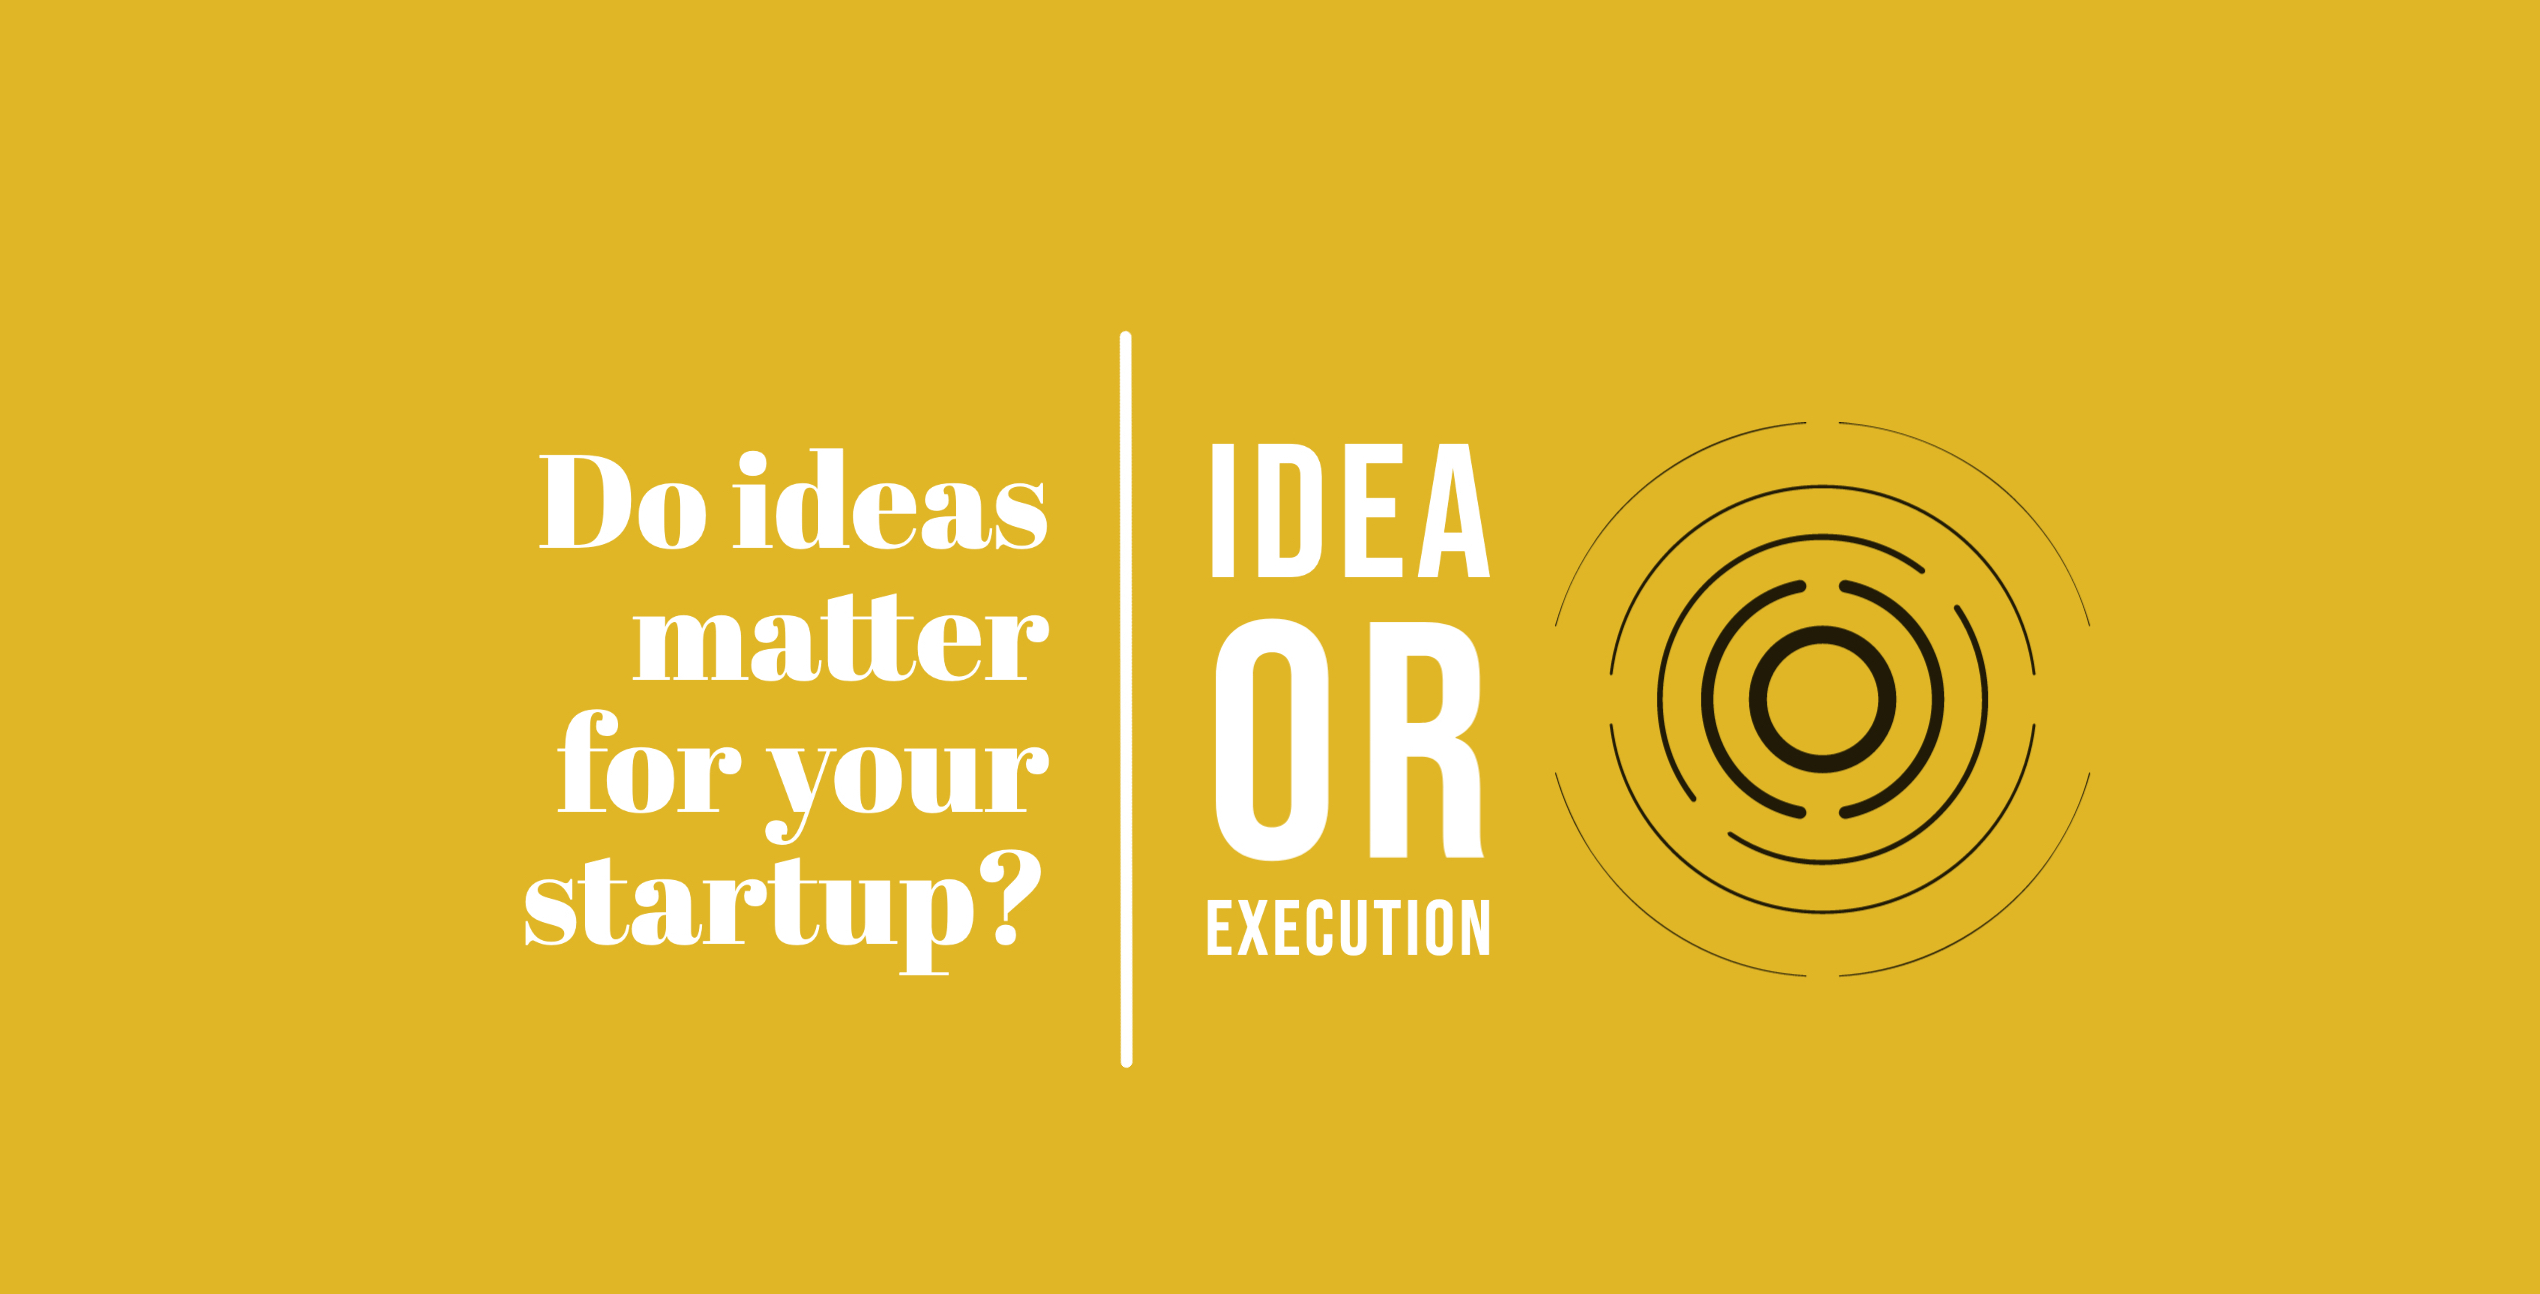 Idea versus Execution - Do Ideas Matter for Your Startup